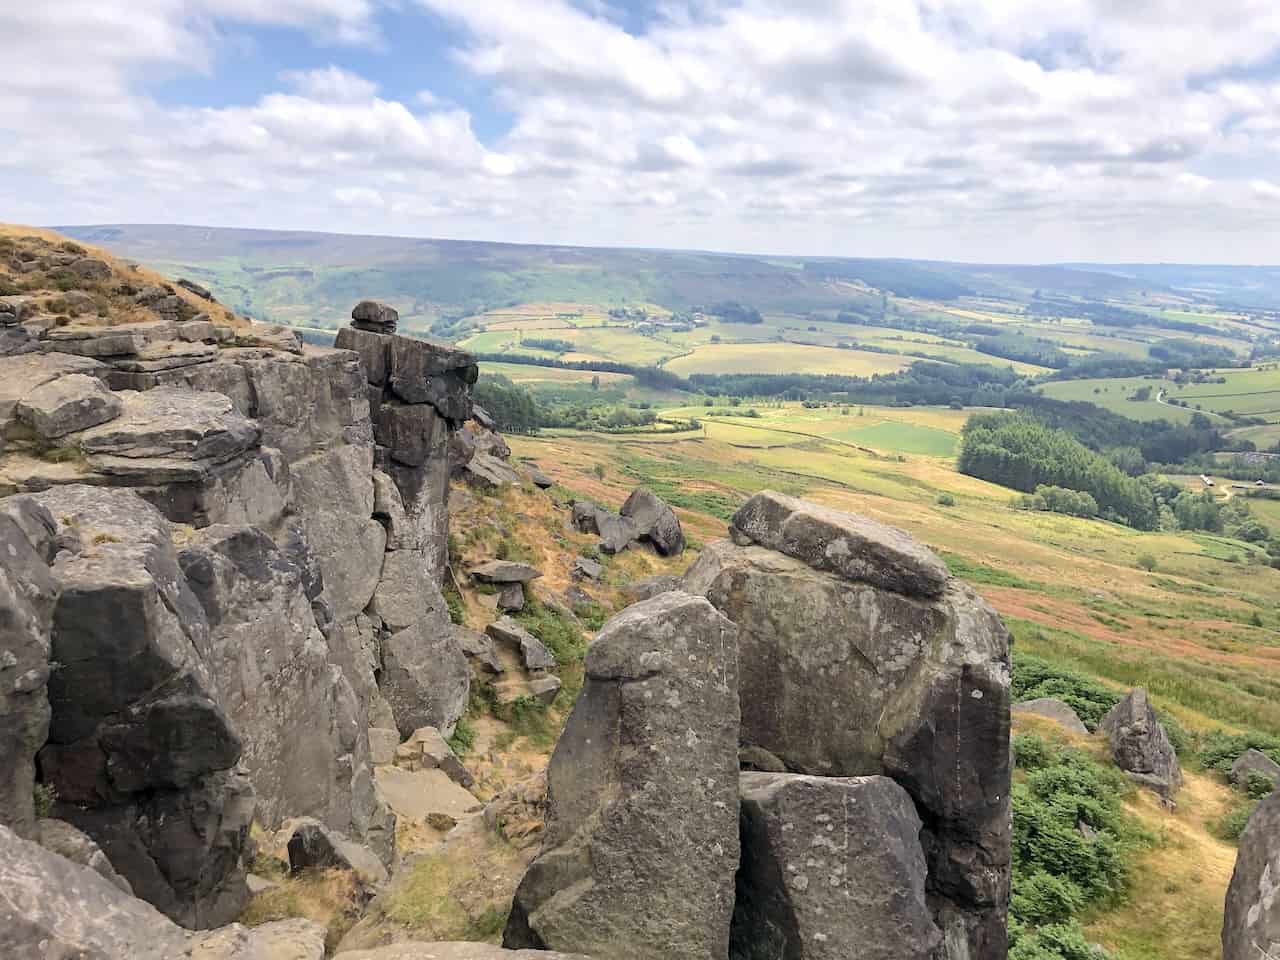 A full 360° panorama awaits at the Wainstones, offering spectacular views that stretch out in every direction.